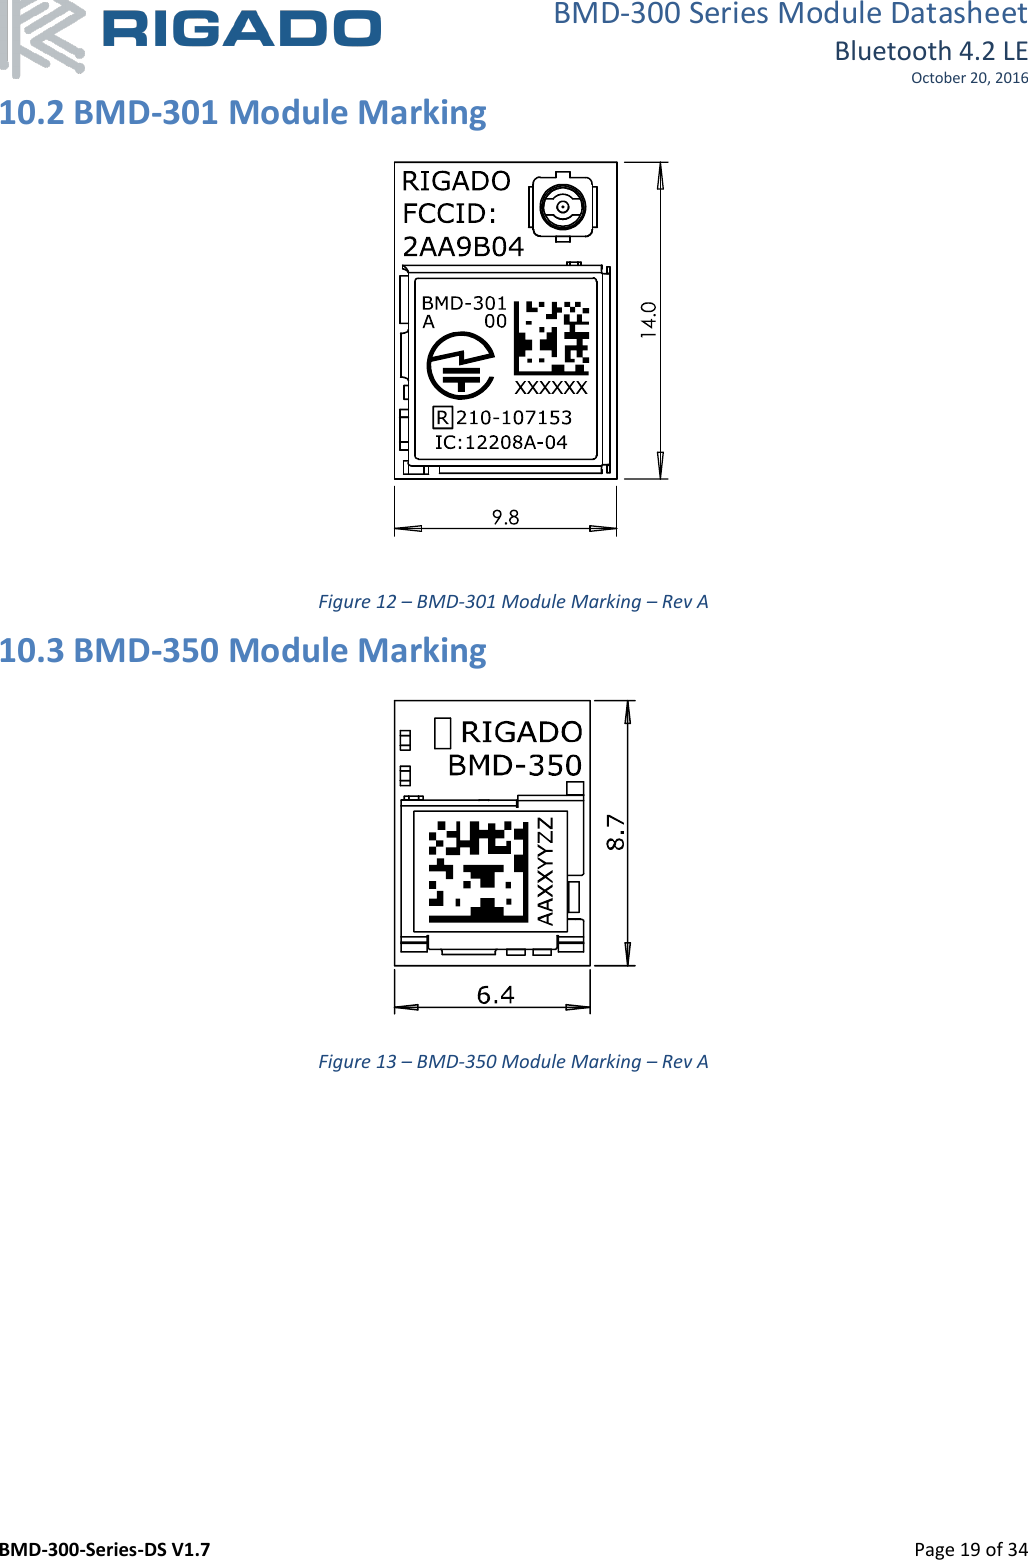 BMD-300 Series Module Datasheet Bluetooth 4.2 LE October 20, 2016 BMD-300-Series-DS V1.7         Page 19 of 34 10.2 BMD-301 Module Marking  Figure 12 – BMD-301 Module Marking – Rev A 10.3 BMD-350 Module Marking  Figure 13 – BMD-350 Module Marking – Rev A   